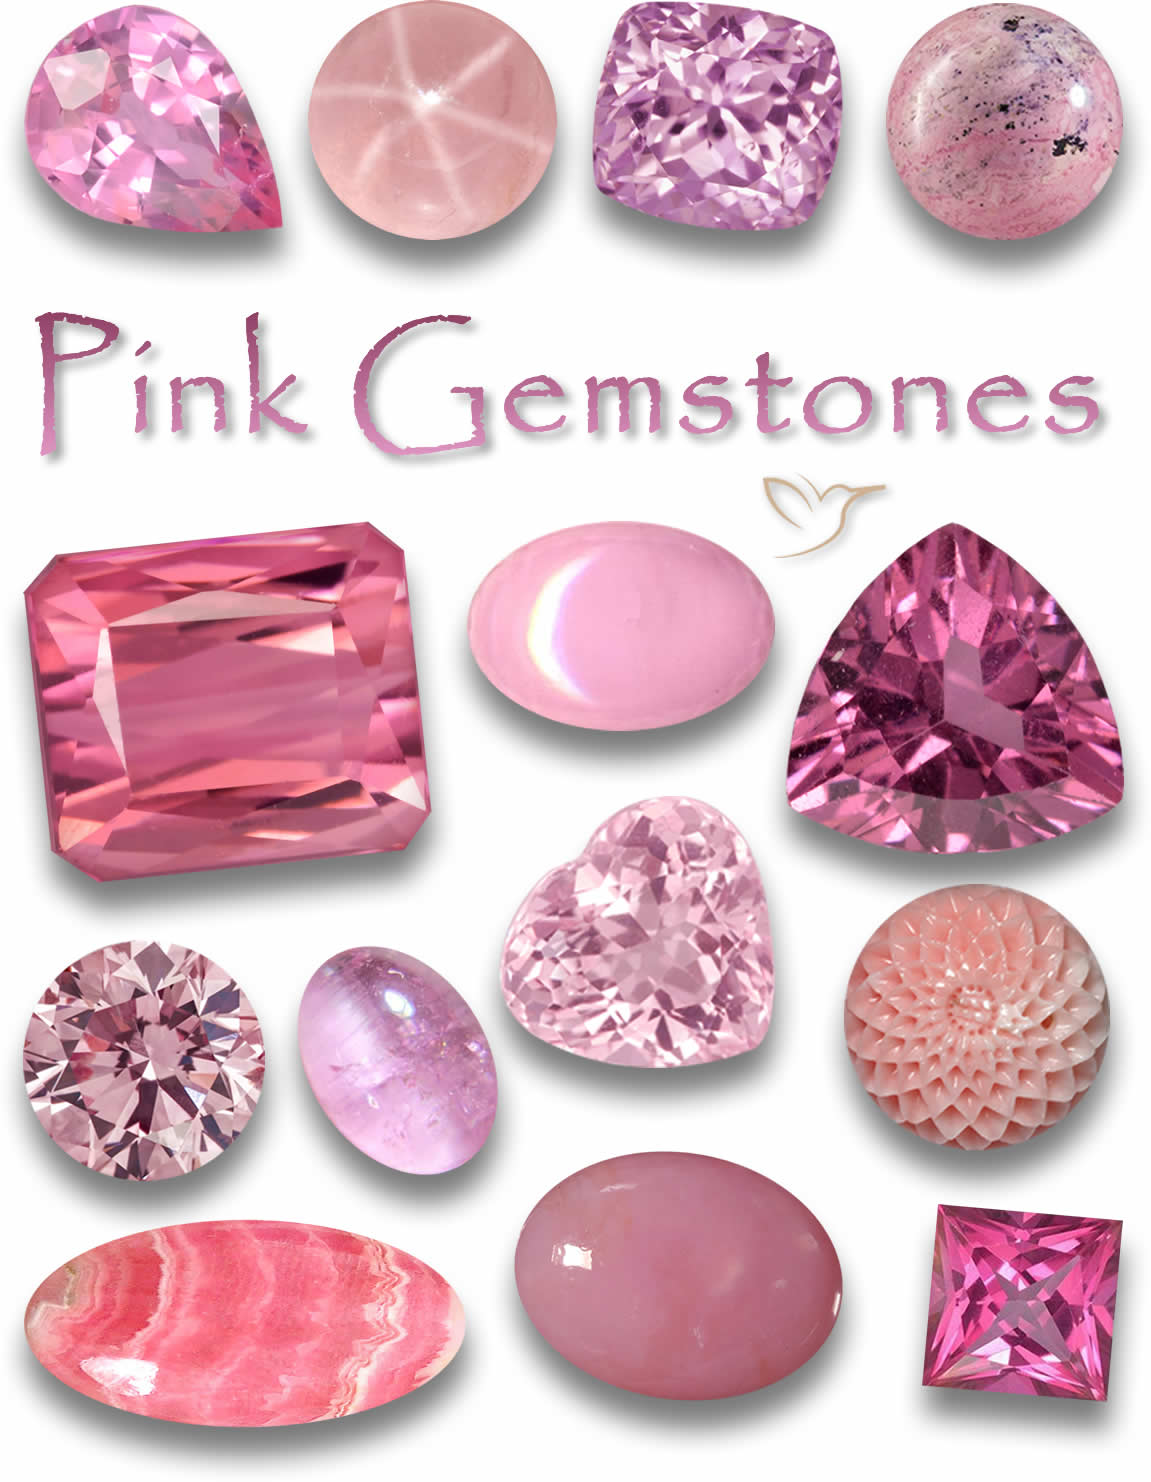 Pink Gemstones - List of Pink Stones with Images and Charts